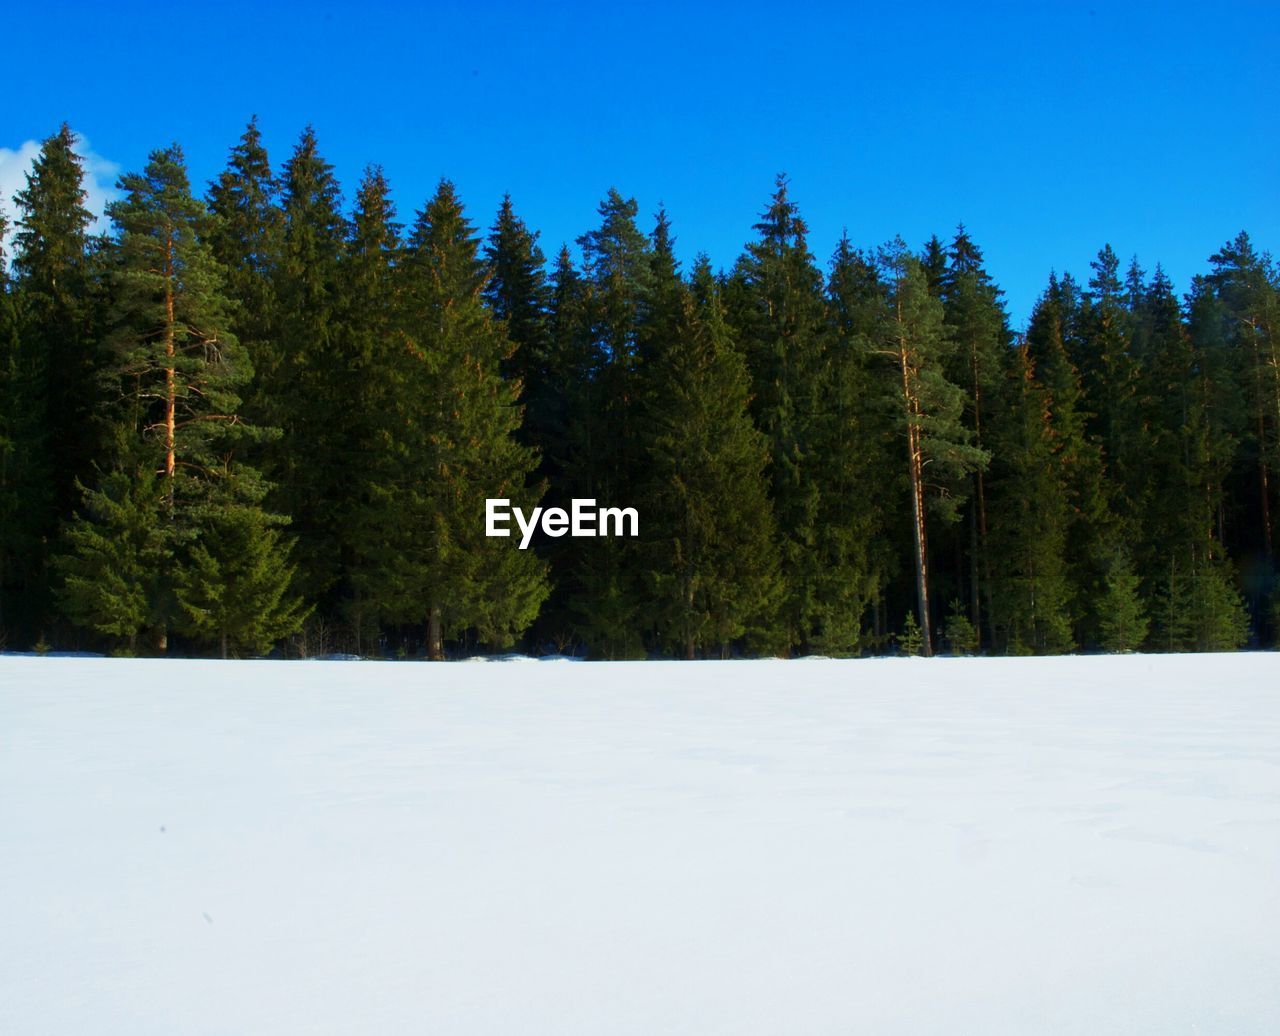 Trees in front of snow covered field against clear blue sky